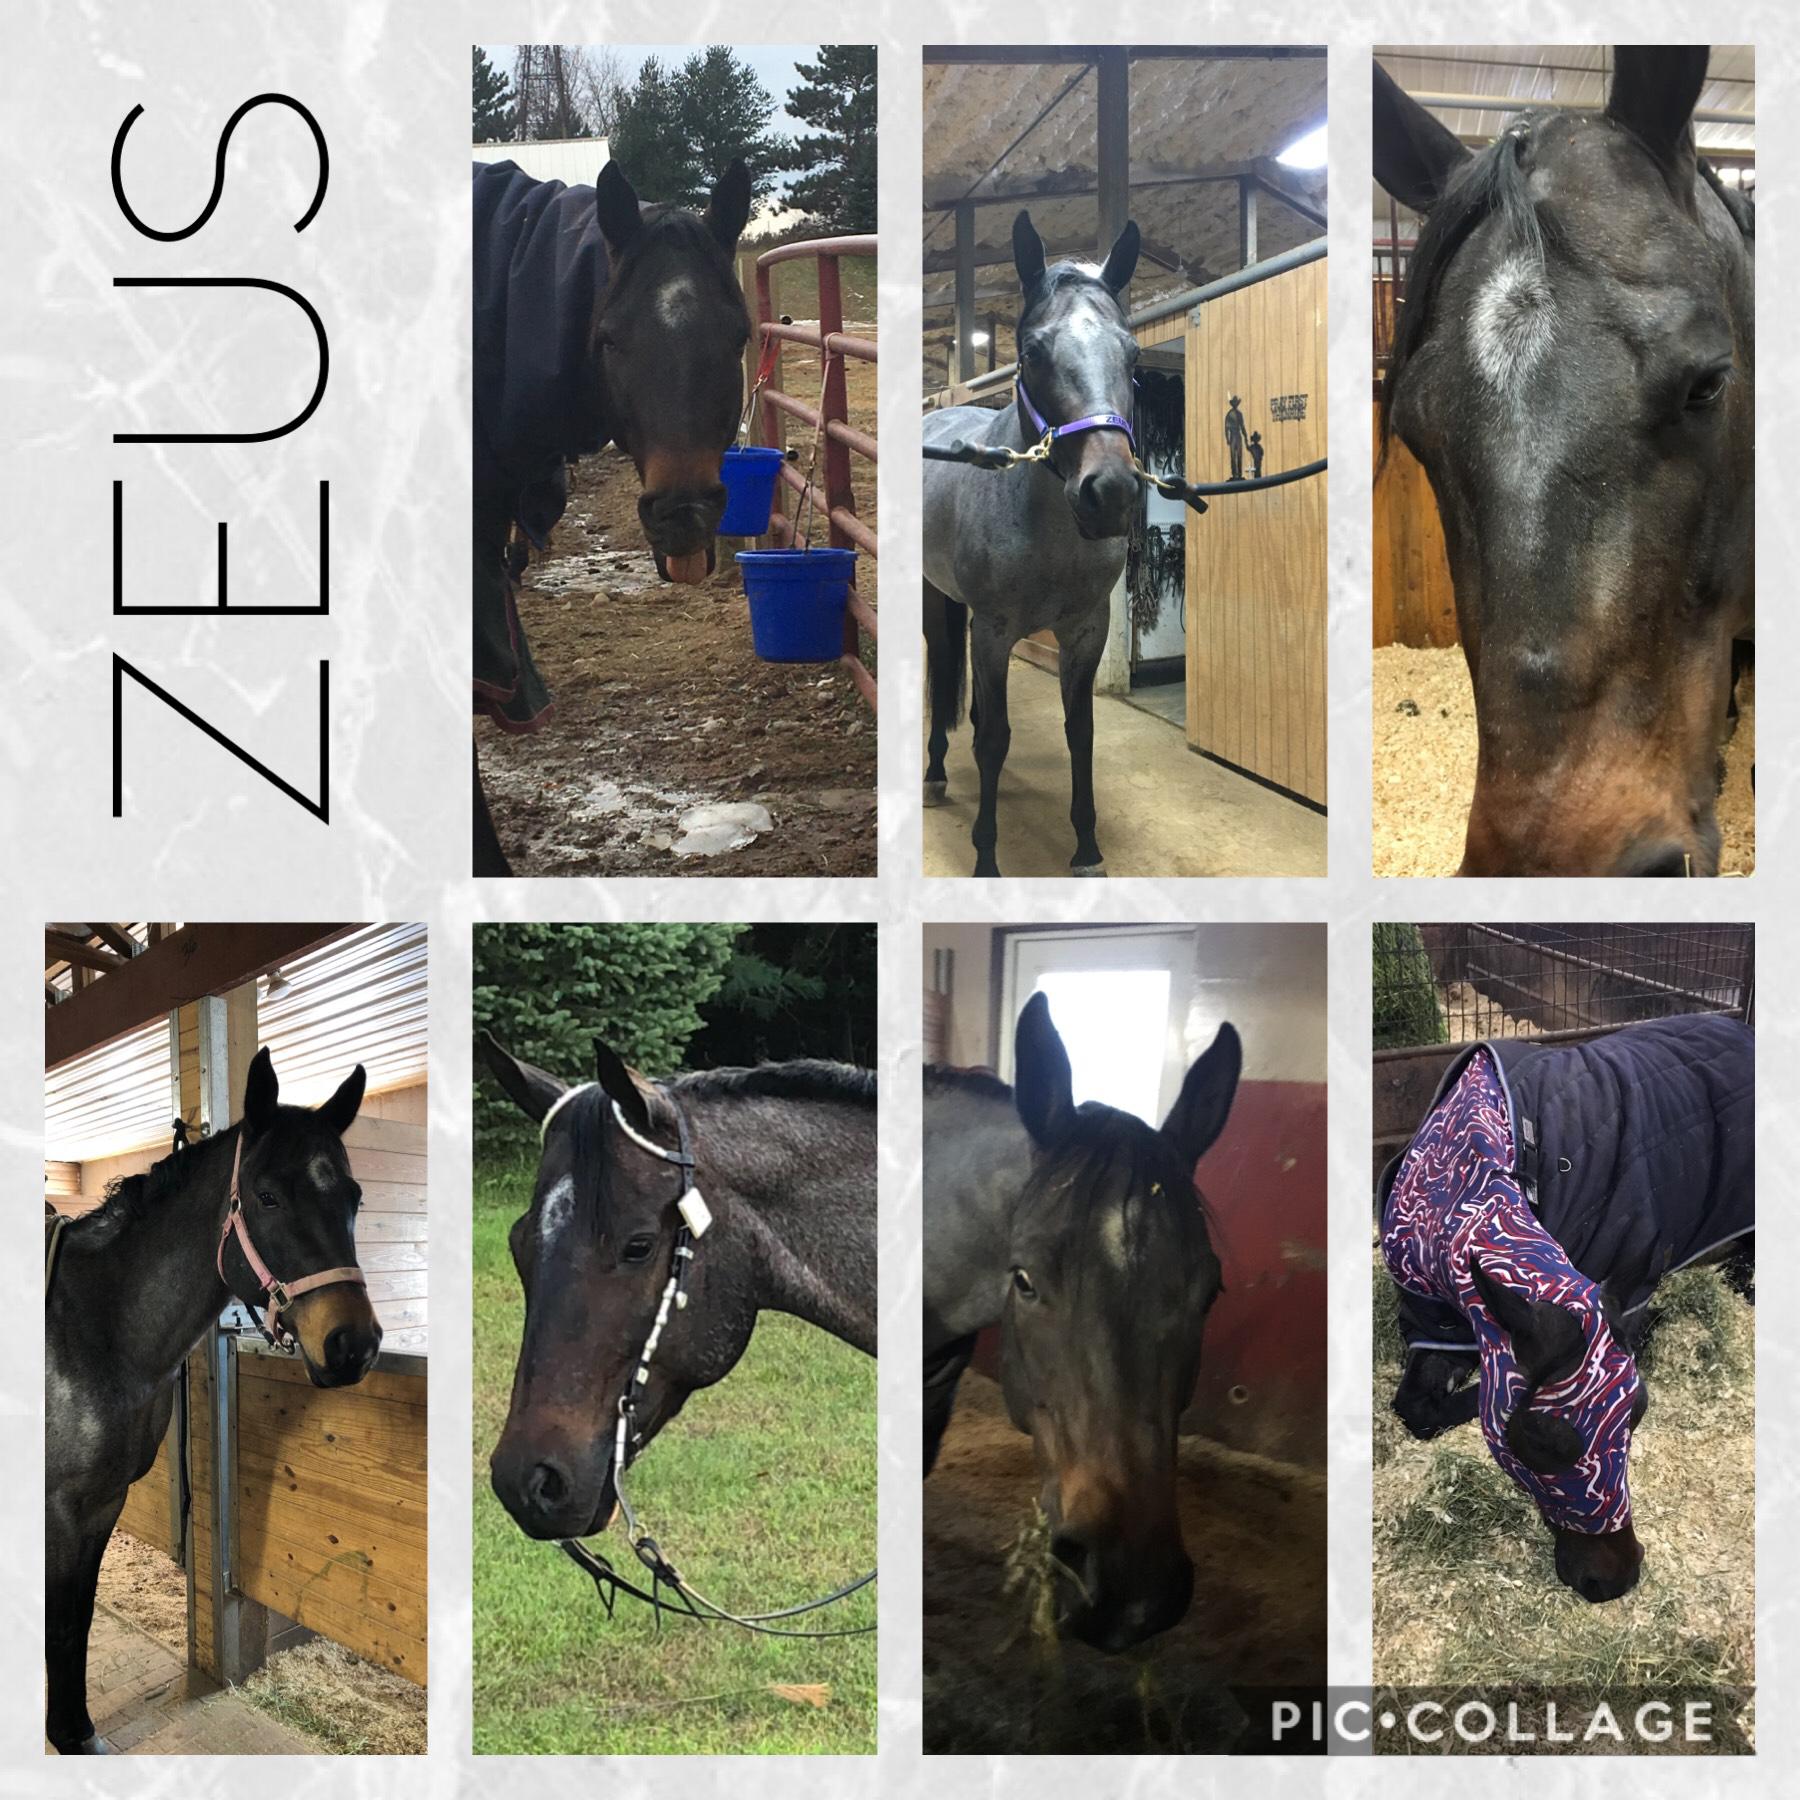 Zeus is my show horse!❤️😍(aka horse_46 and Addison) This will my second year showing him! Zeus loves carrots-but hates apples😂 he won’t even take a single bite out of one!